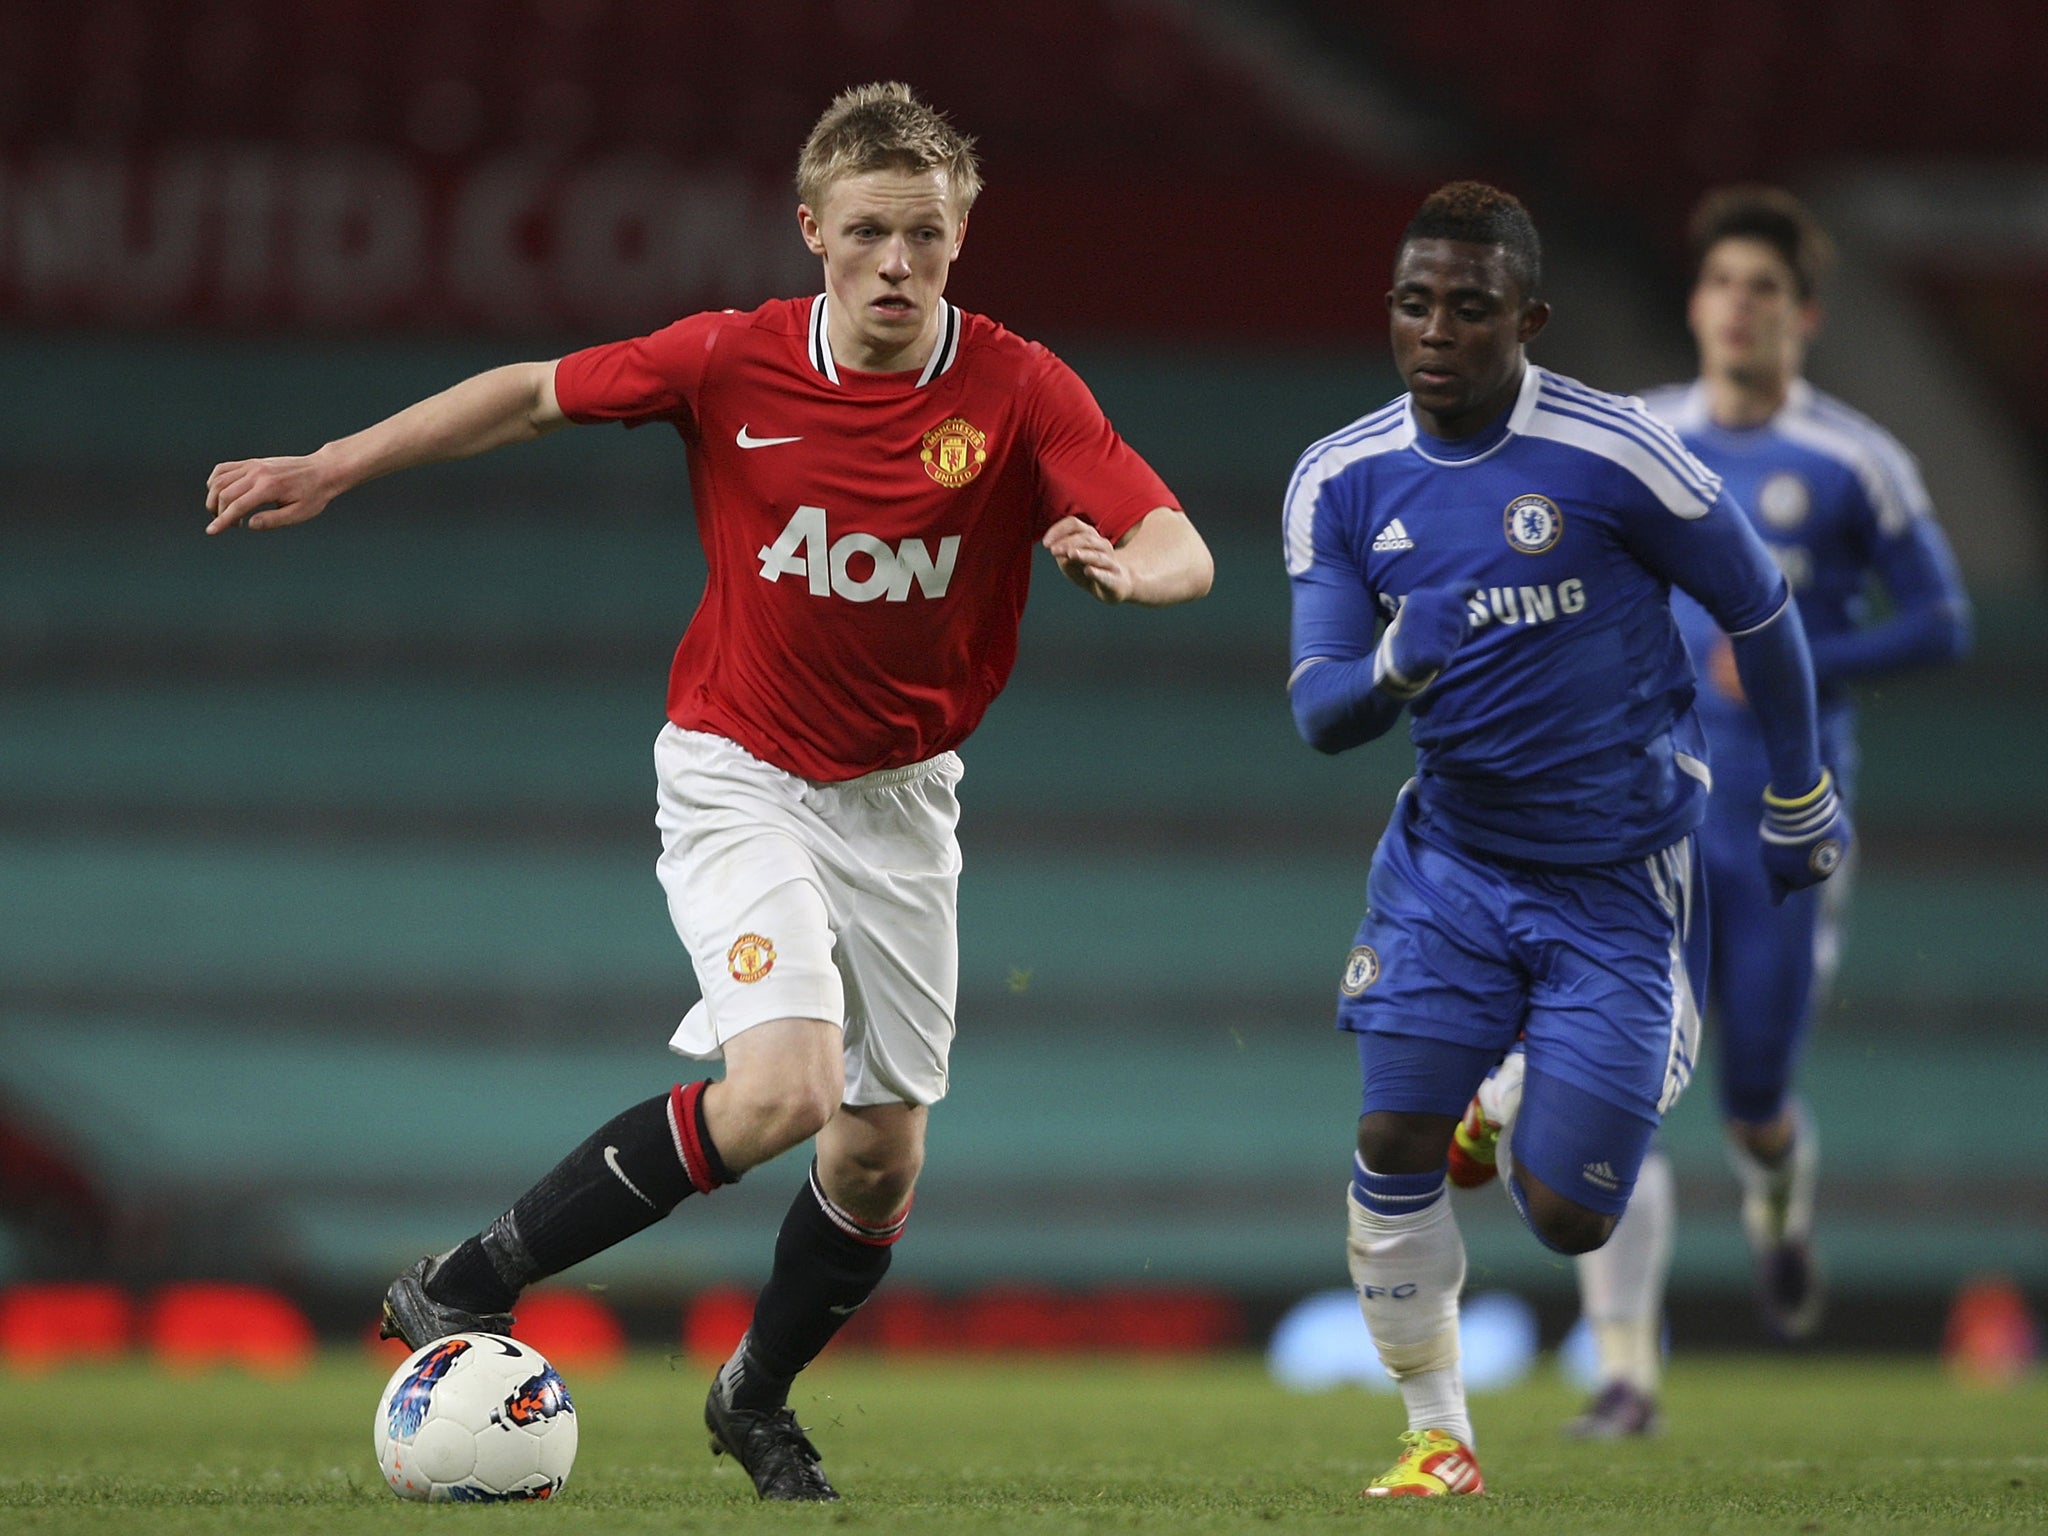 Mats Moller Daehli has joined Cardiff City having left Manchester United last year